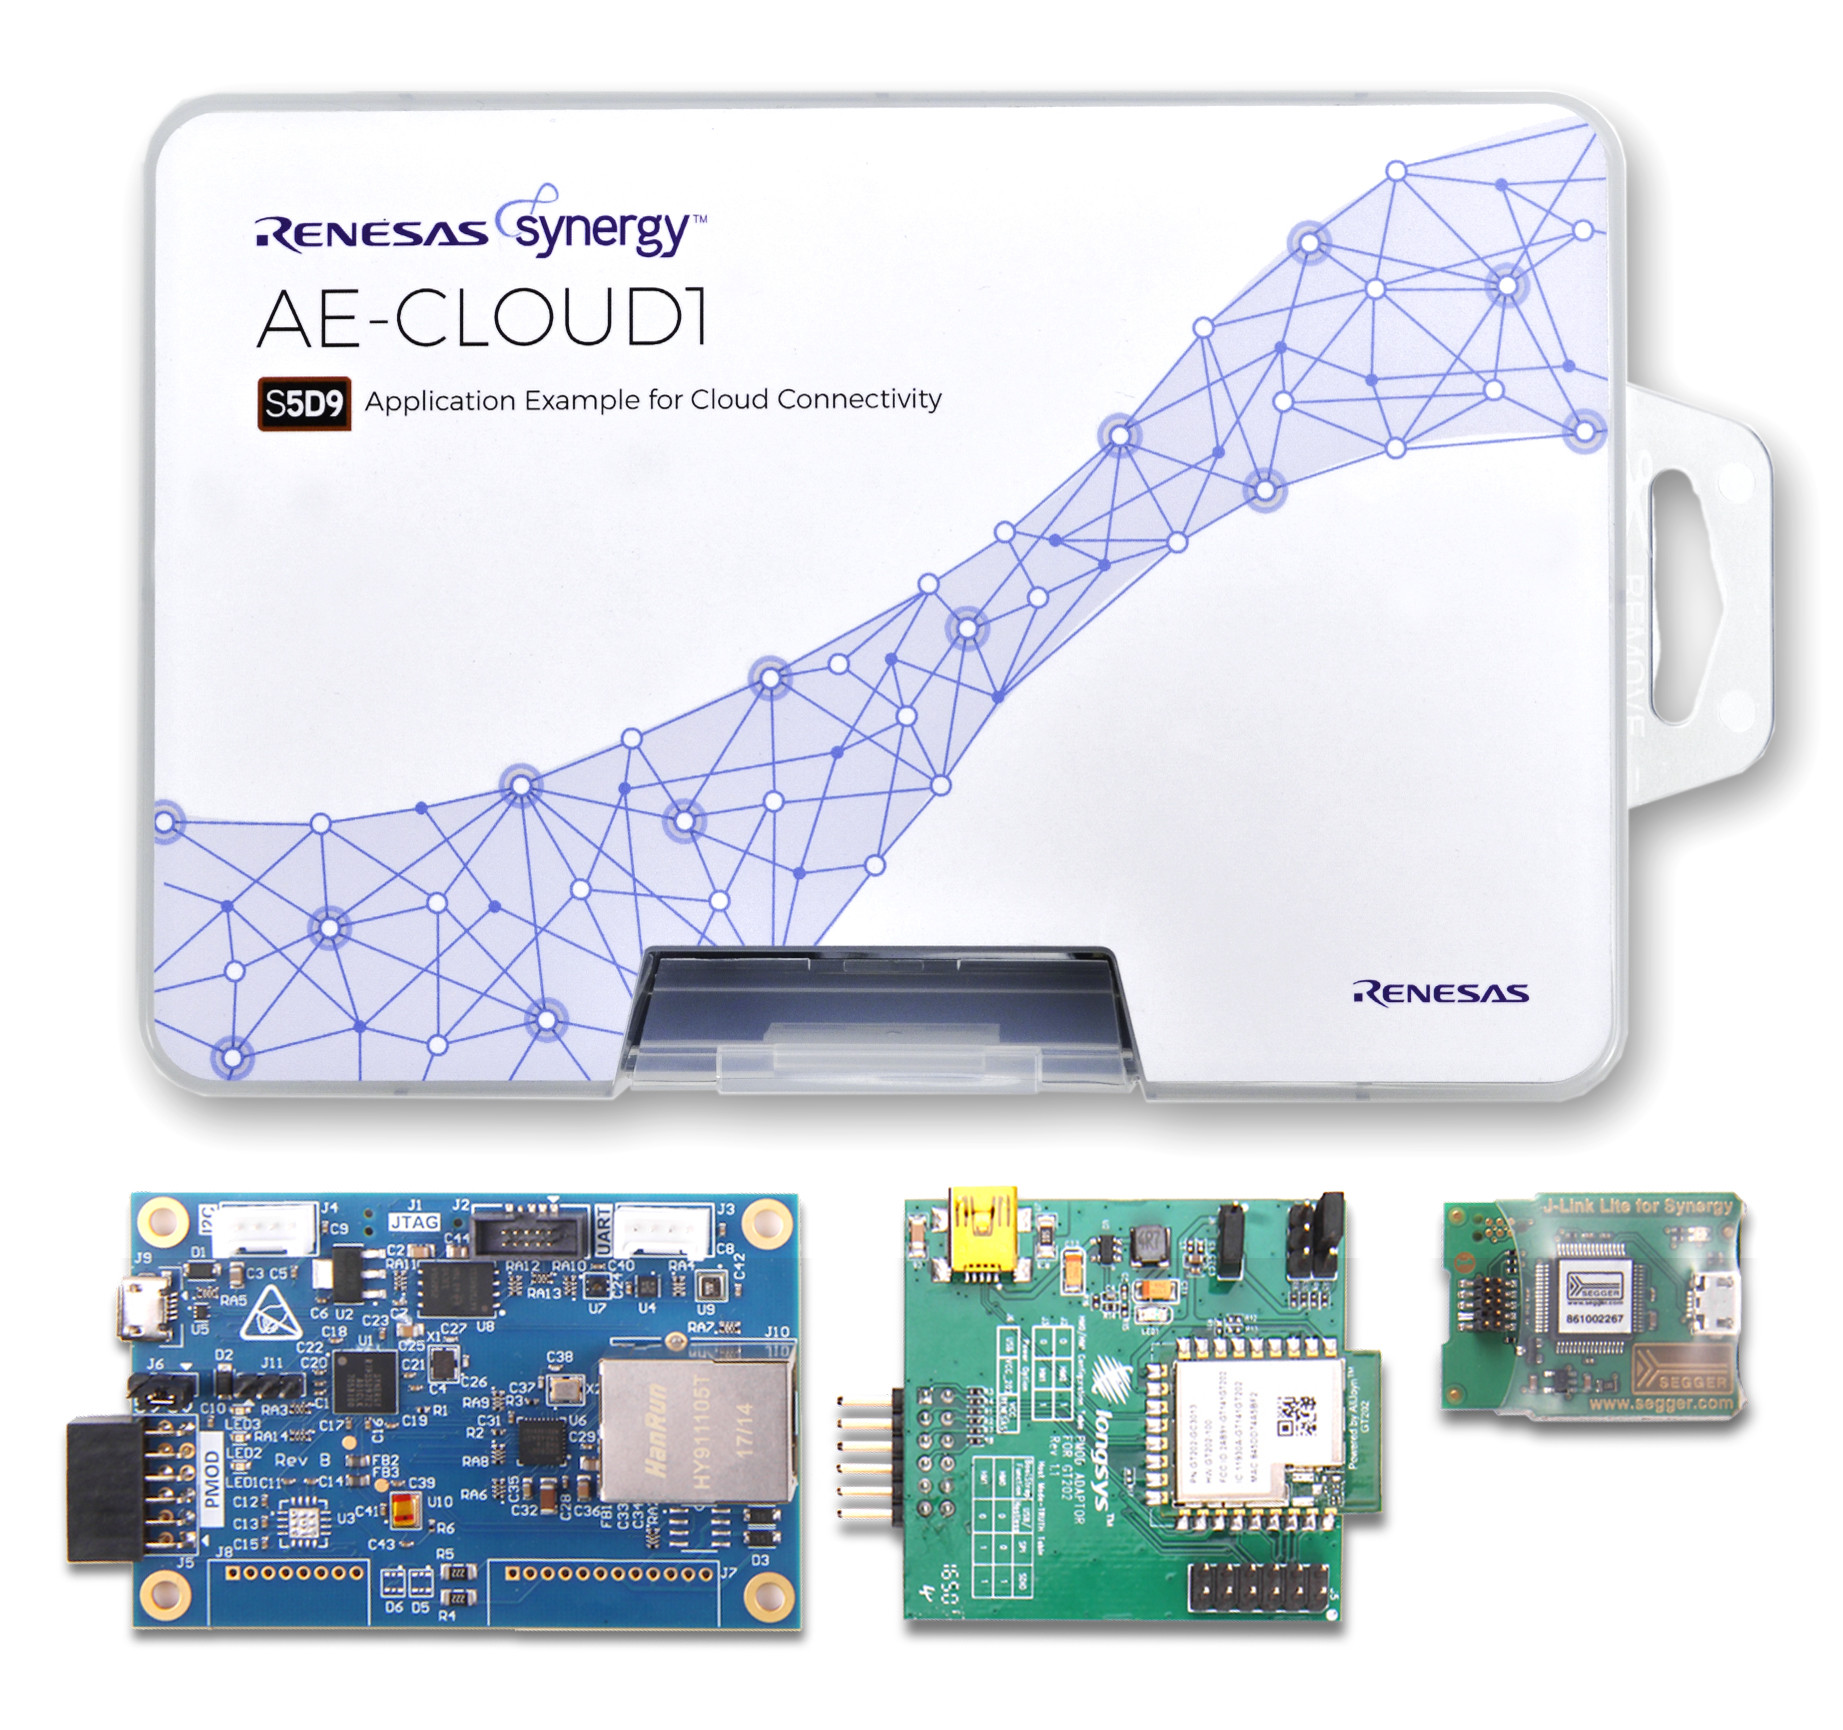 Renesas Synergy: Complete Solution for IoT Development